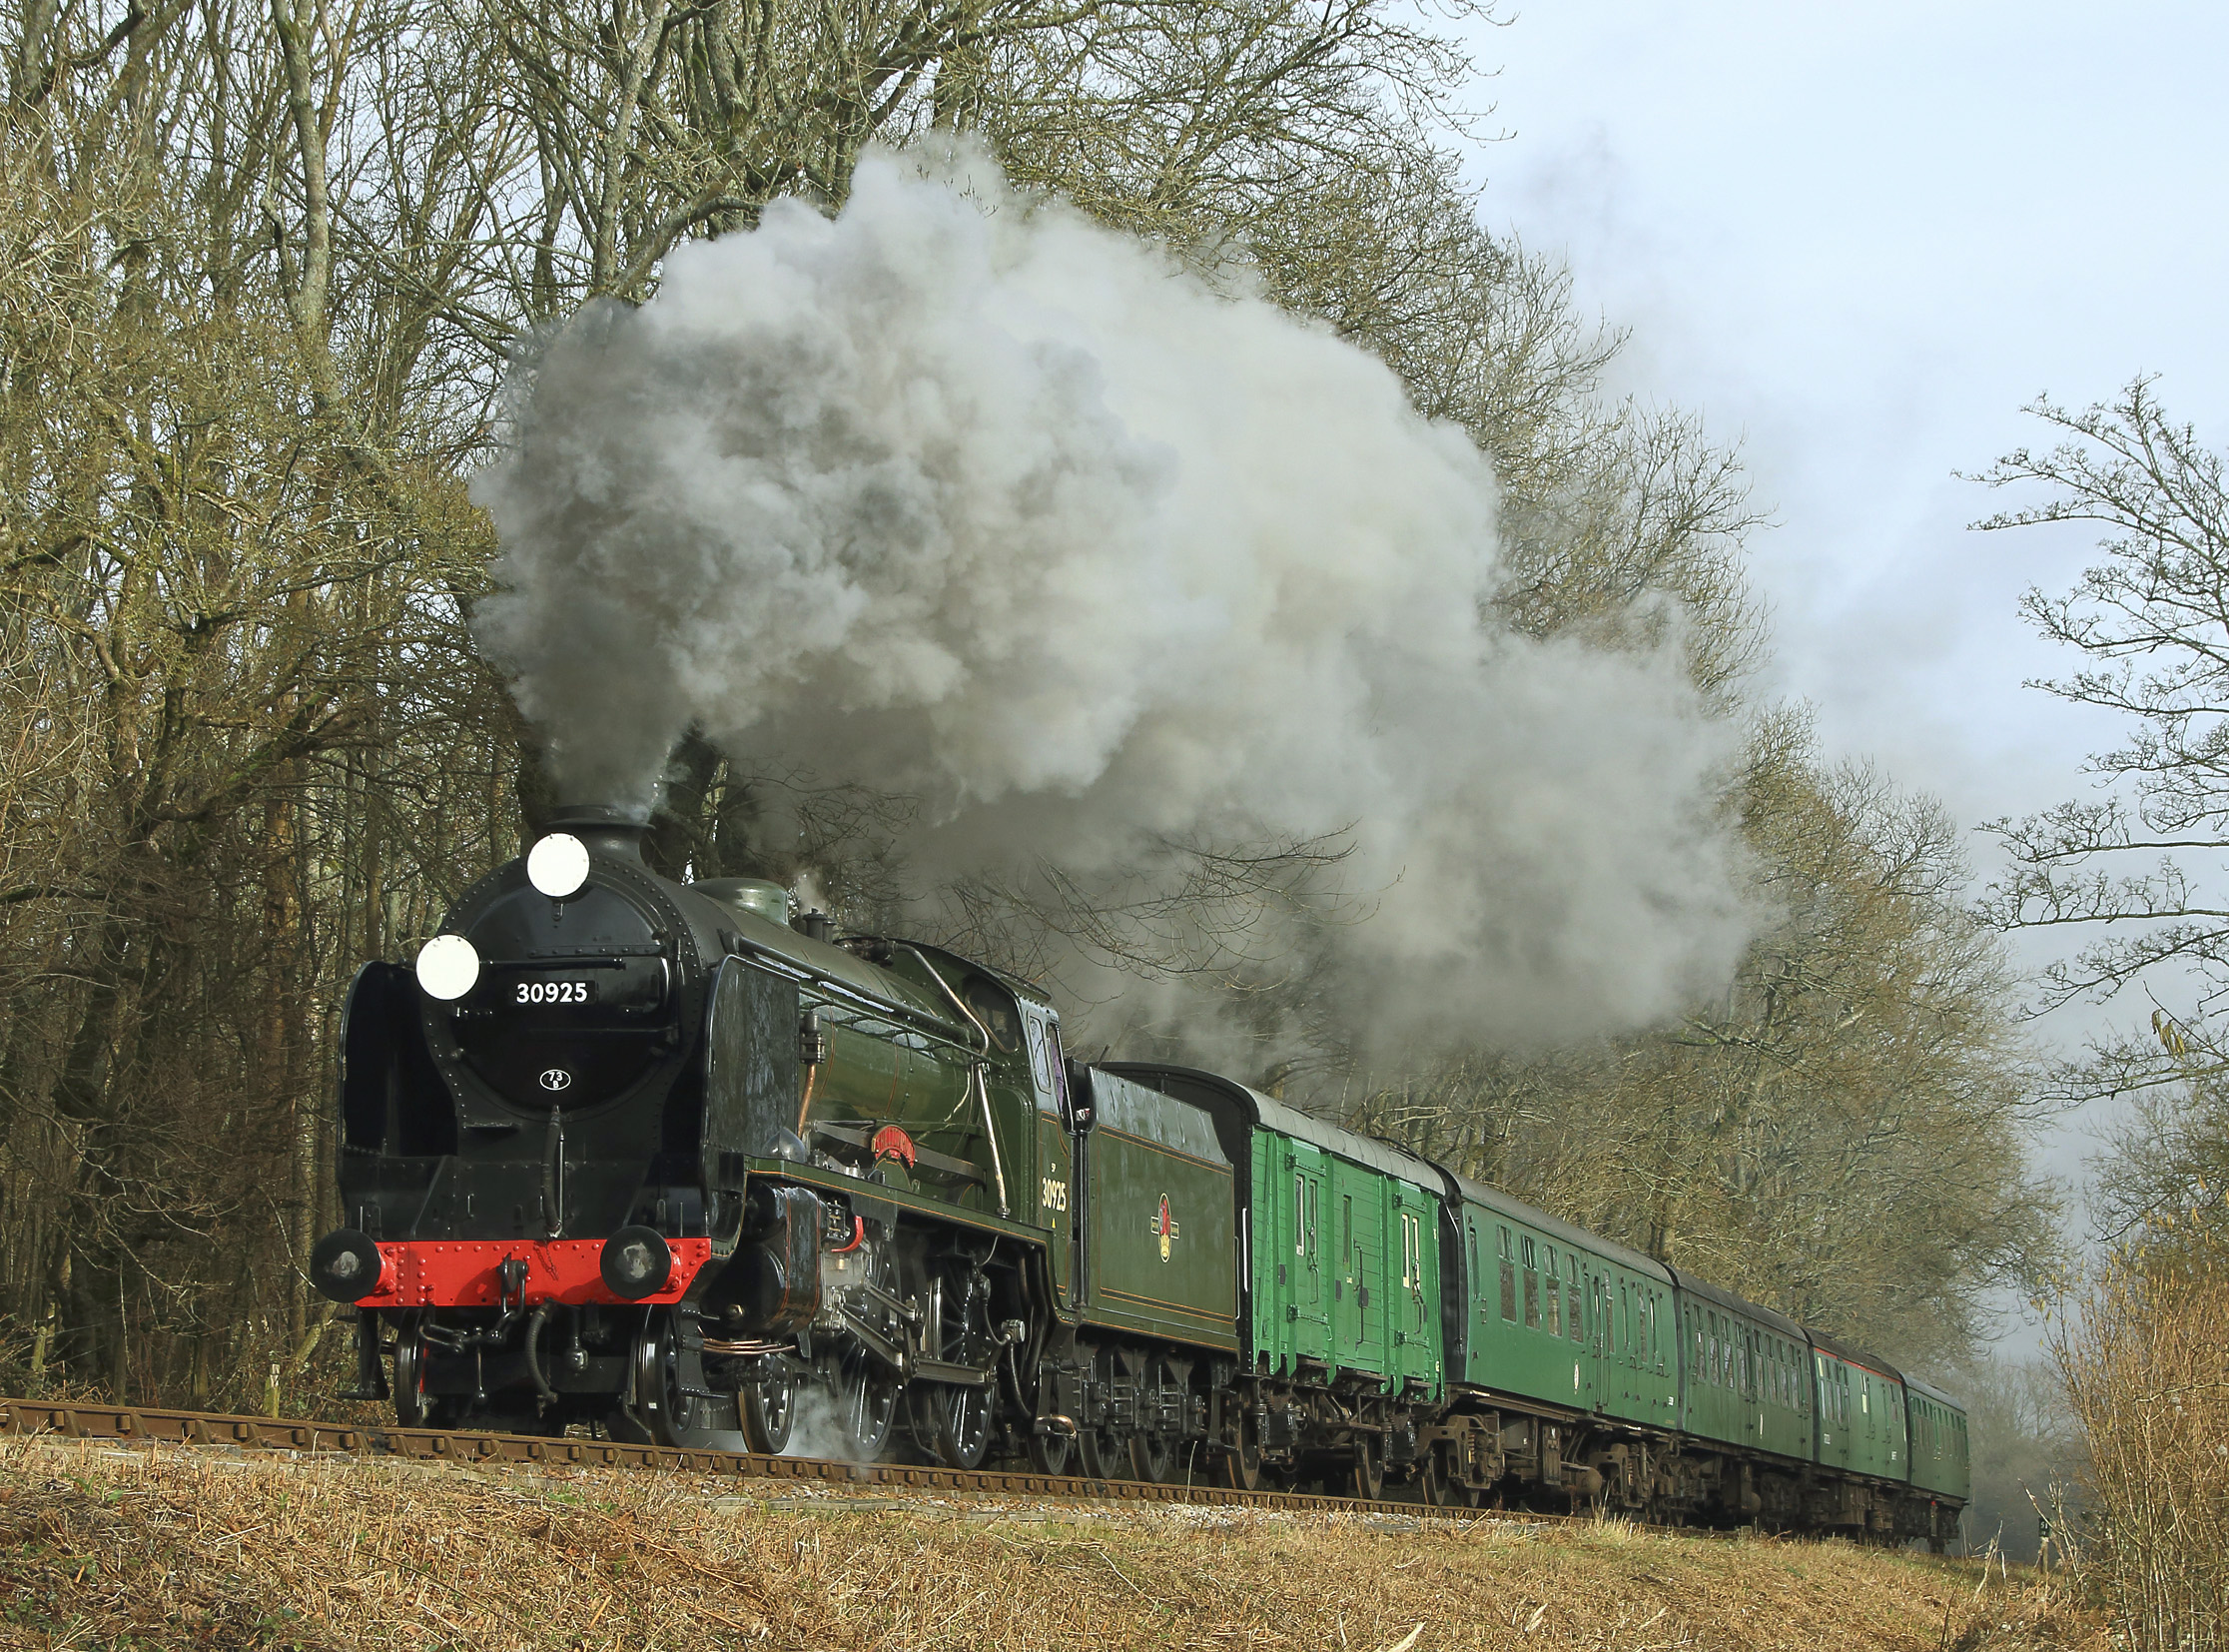 30925 Cheltenham is seen here working hard up the grade through Chawton Woods, between Alton and Medstead & Four Marks on the Mid Hants Railway (the Watercress Line), while working a Time Line Events photo charter on 2nd February 2020. Jeremy Harrison